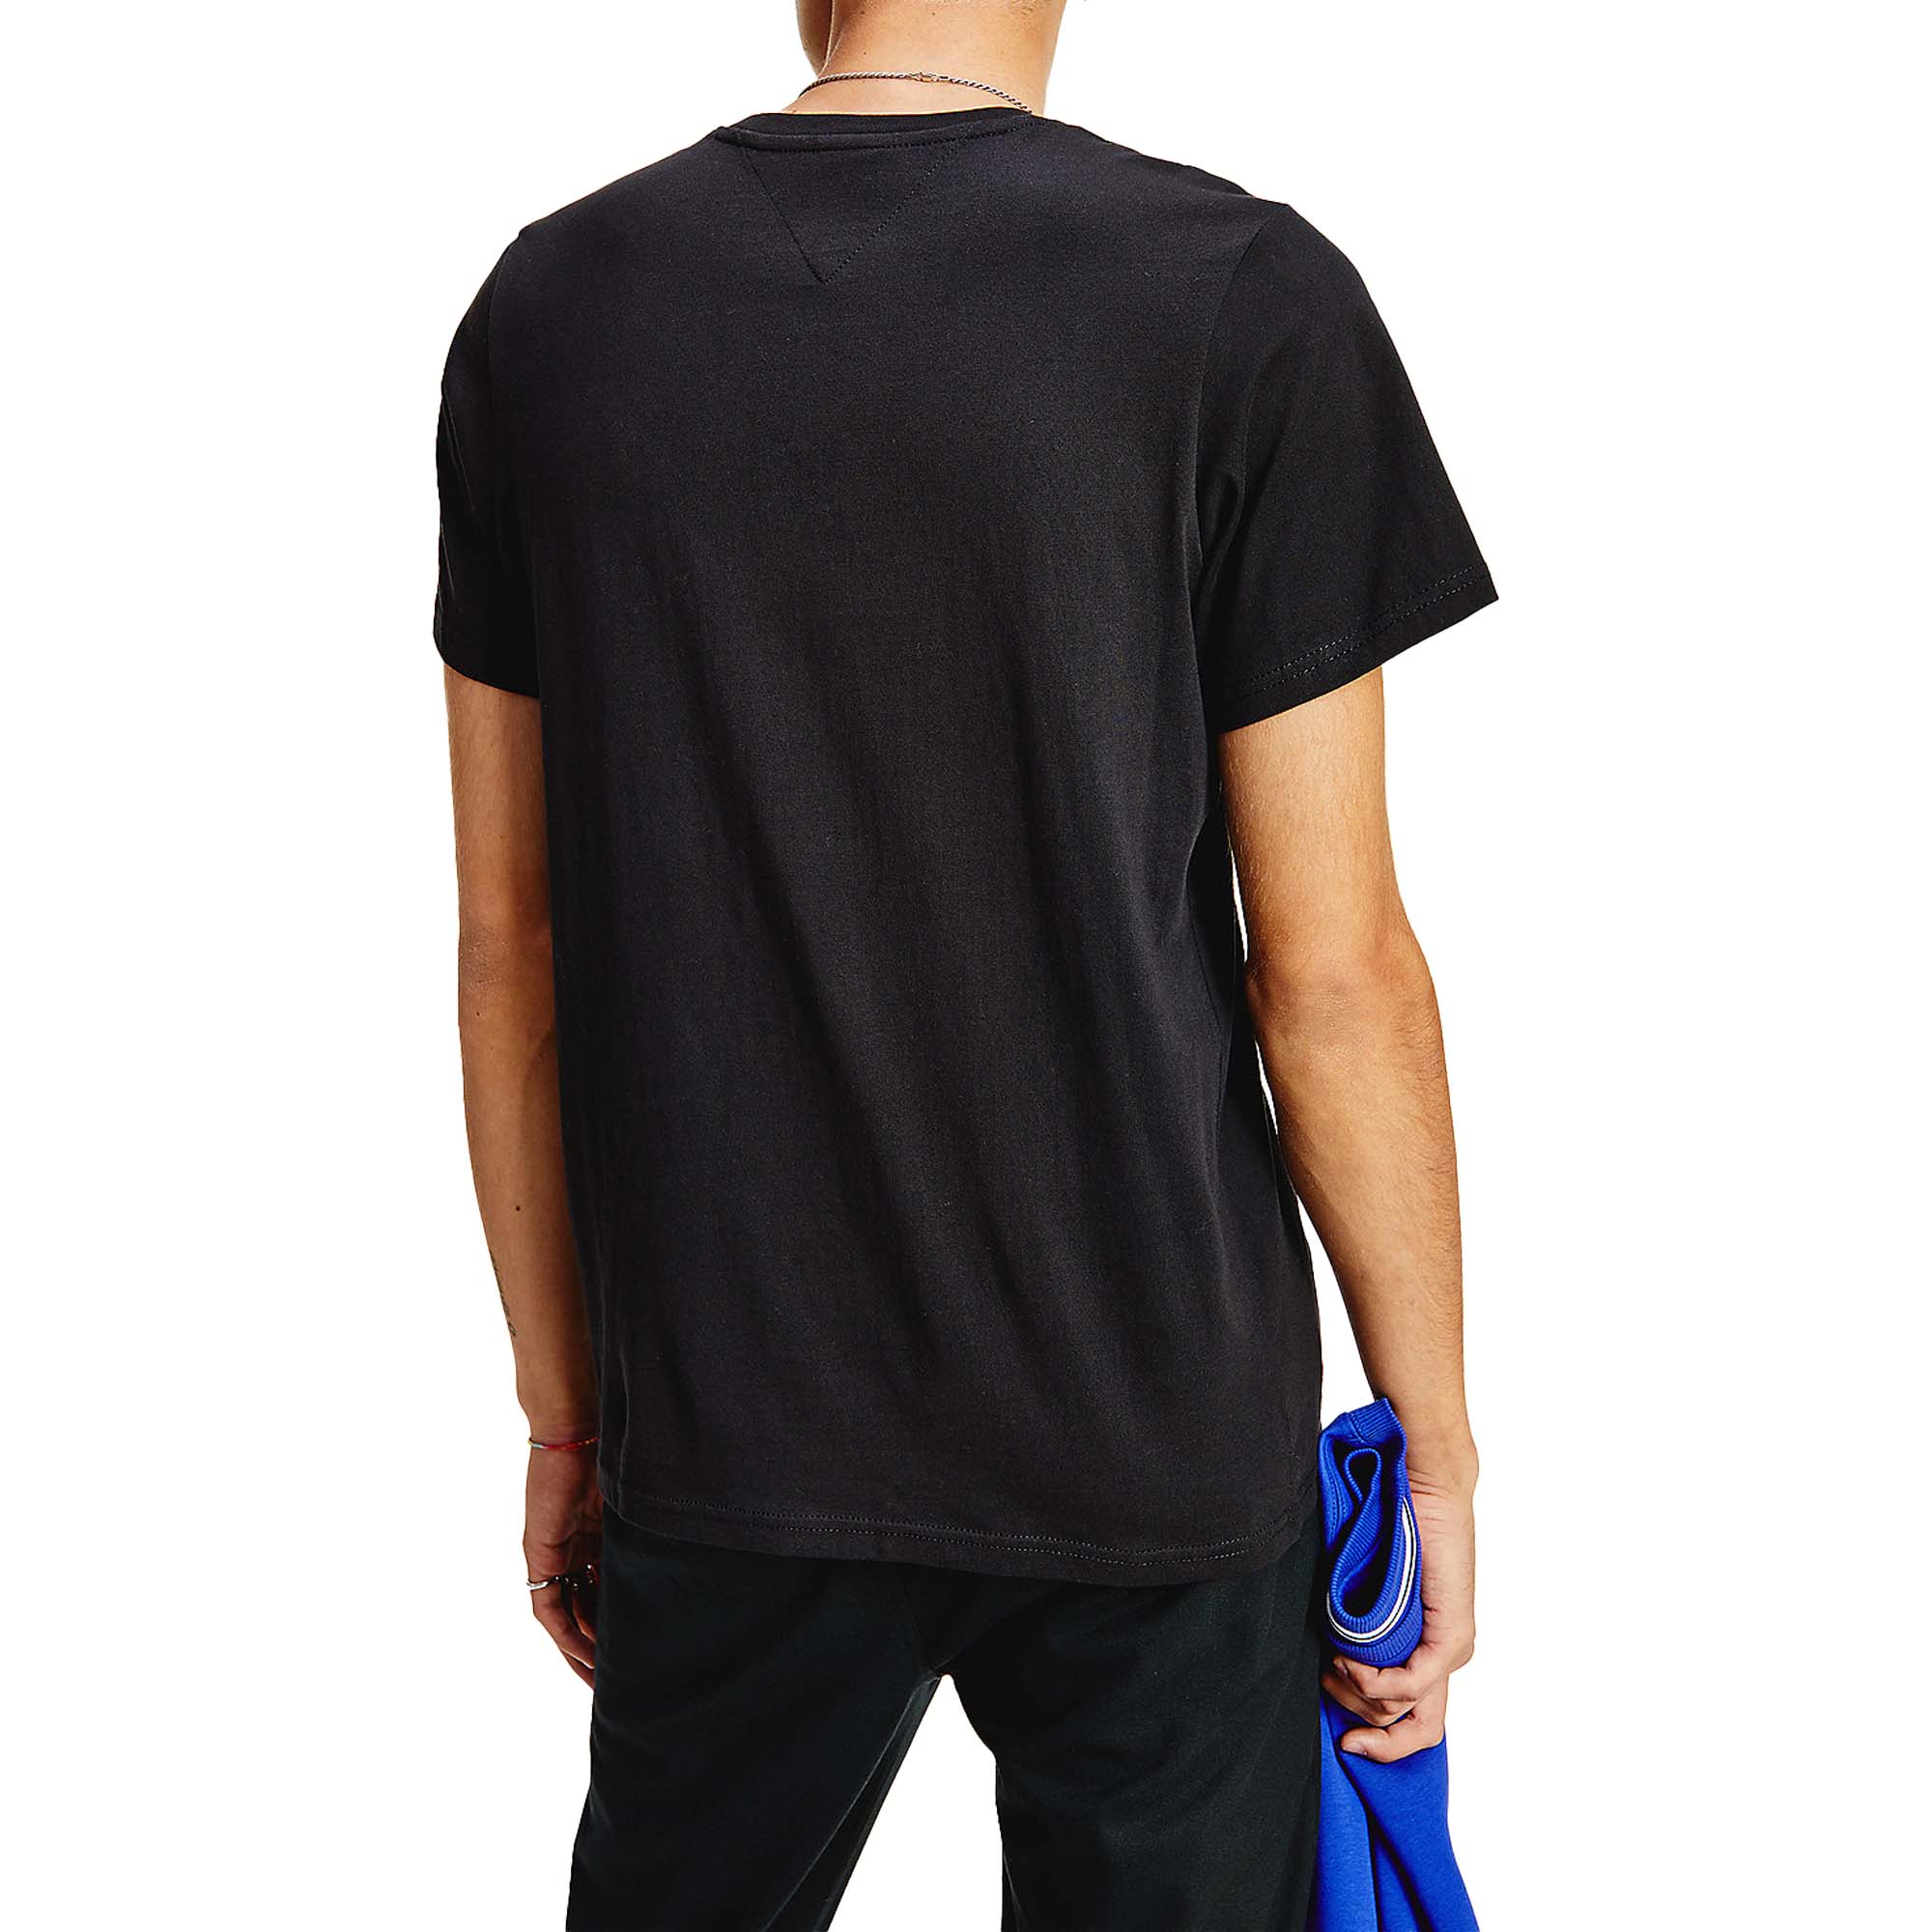 Tommy Jeans Entry Print T-Shirt - Black